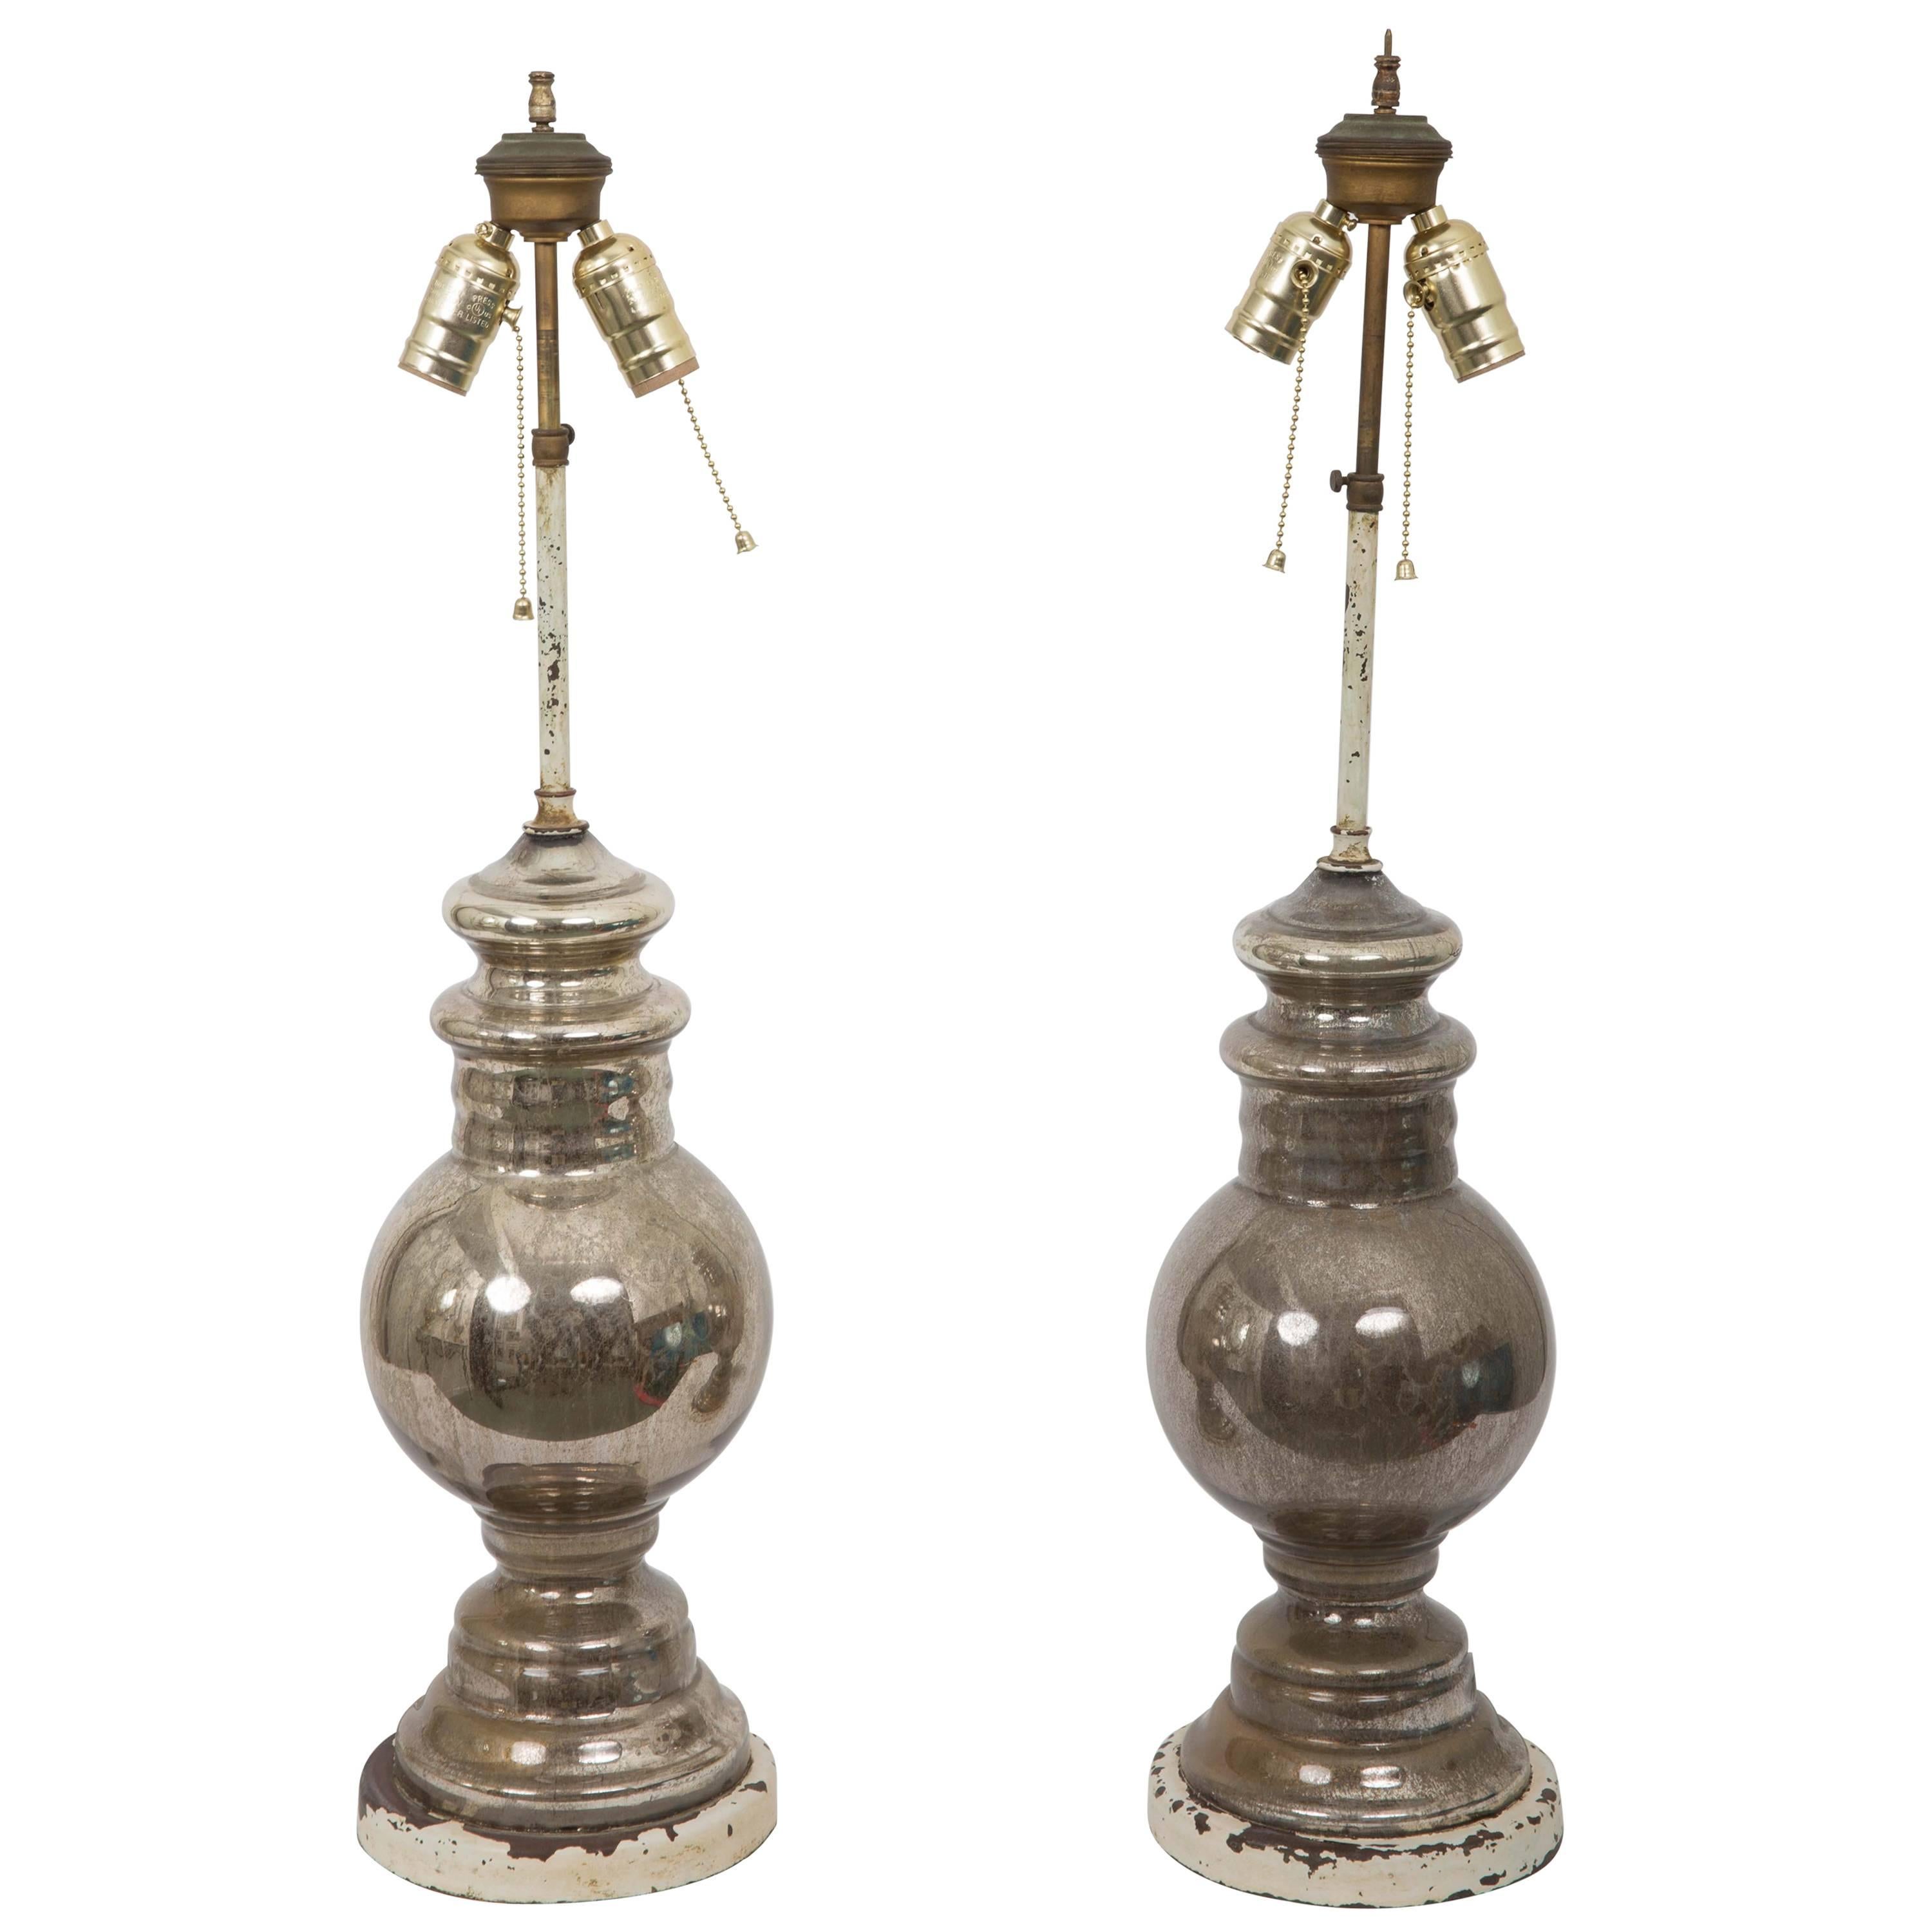 Pair of Antique Mercury Glass Table Lamps